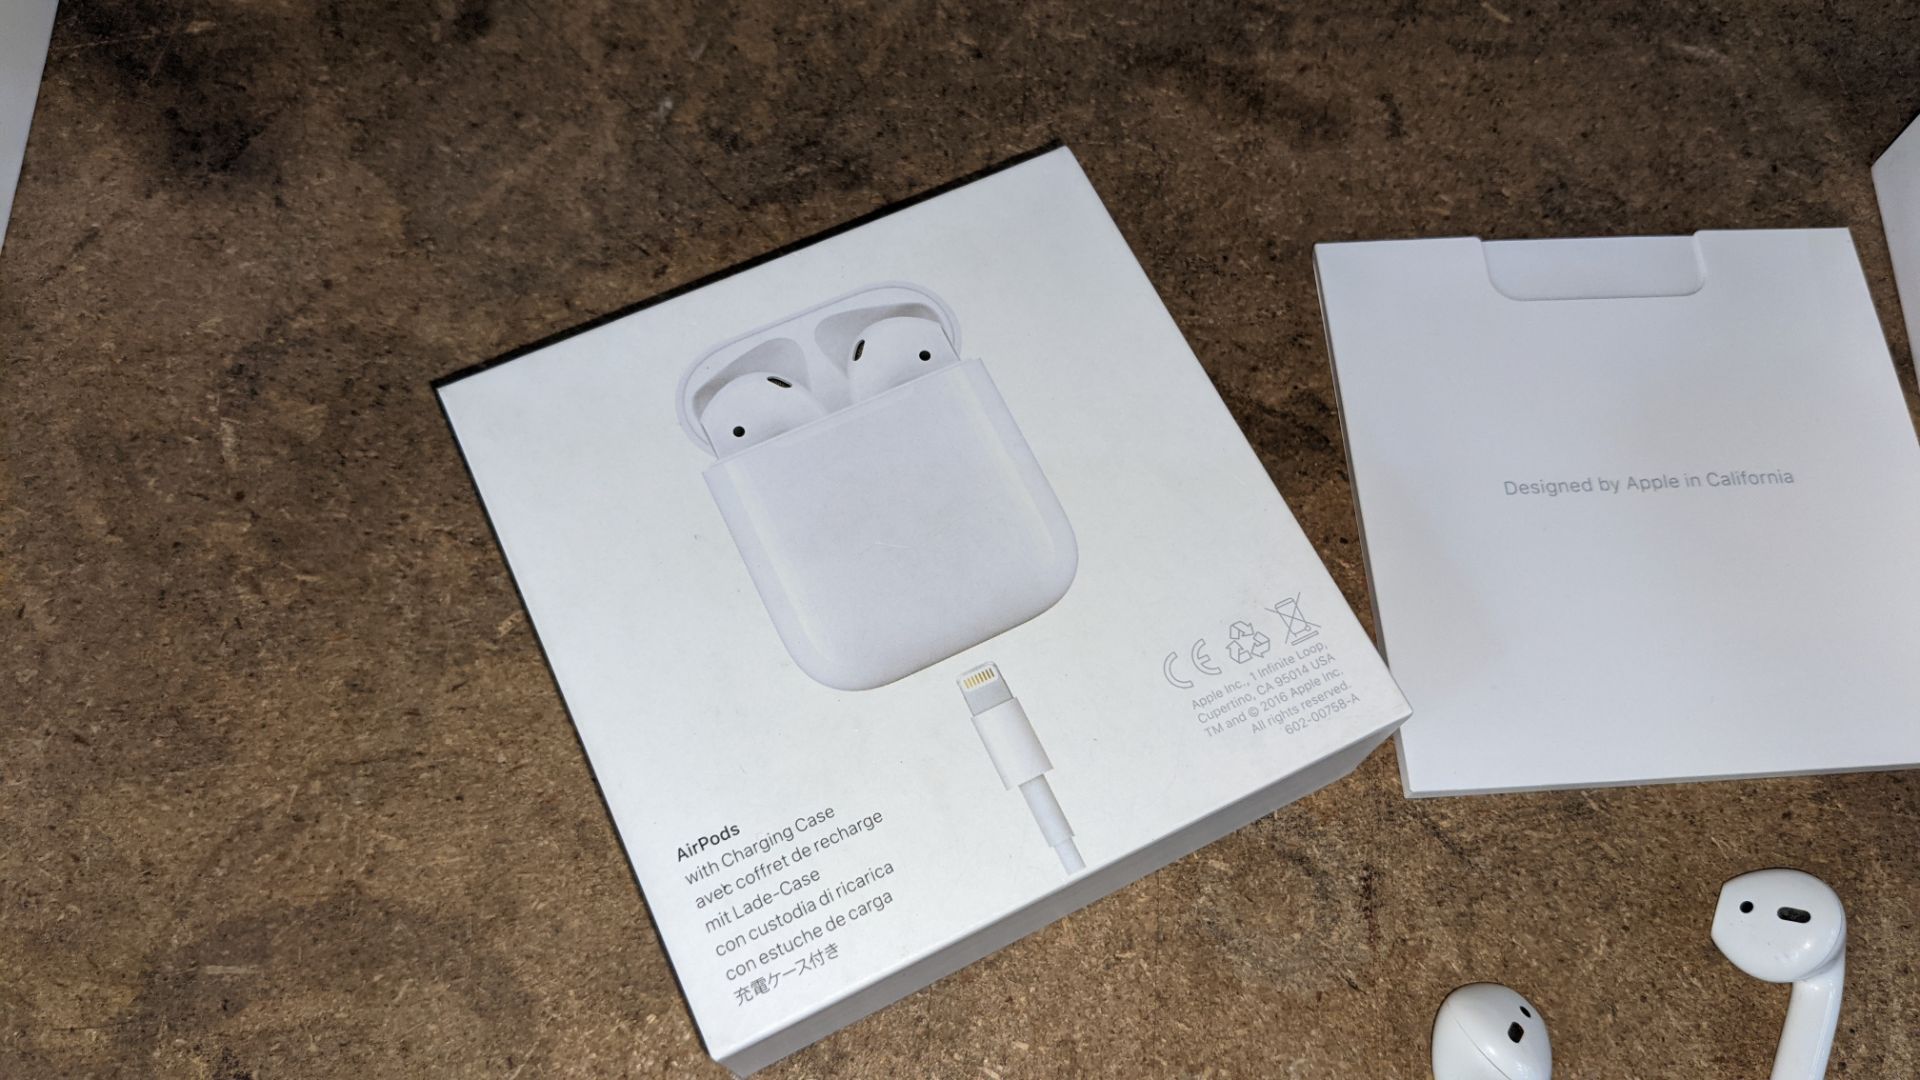 Apple AirPods with charging case, box & book pack - Image 10 of 15